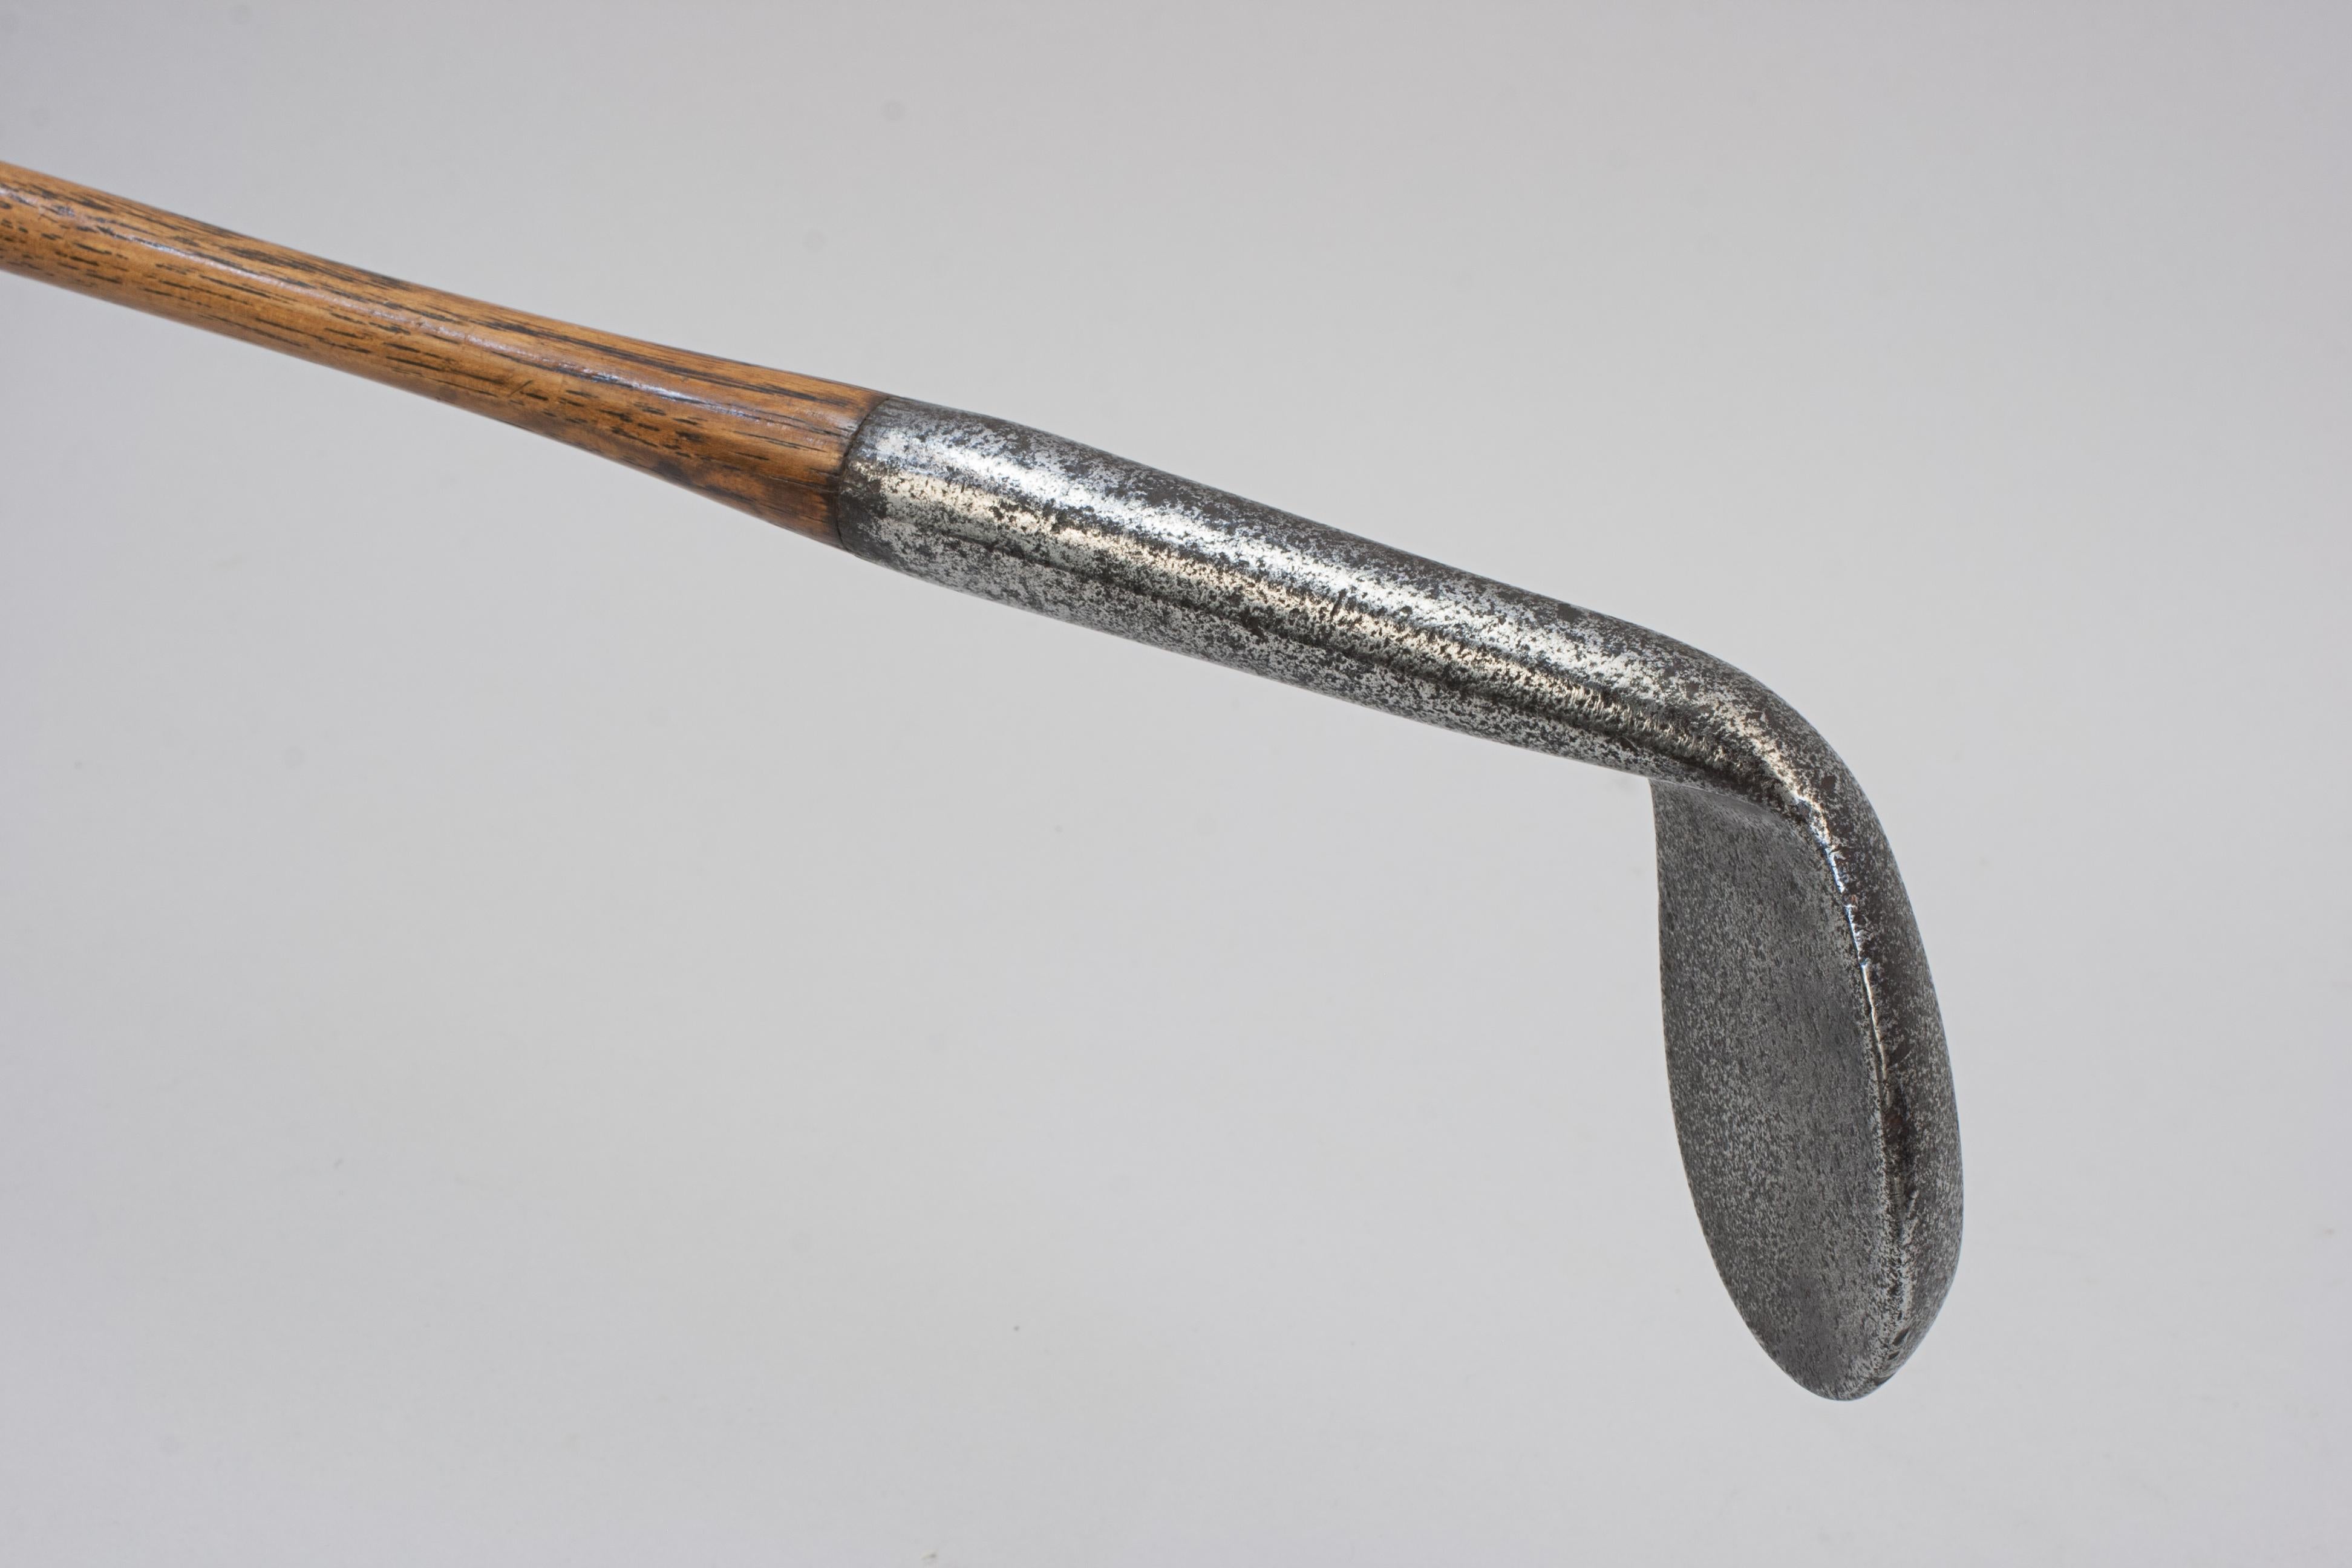 Iron Antique Rut Niblick, Hickory Shafted Golf Club For Sale